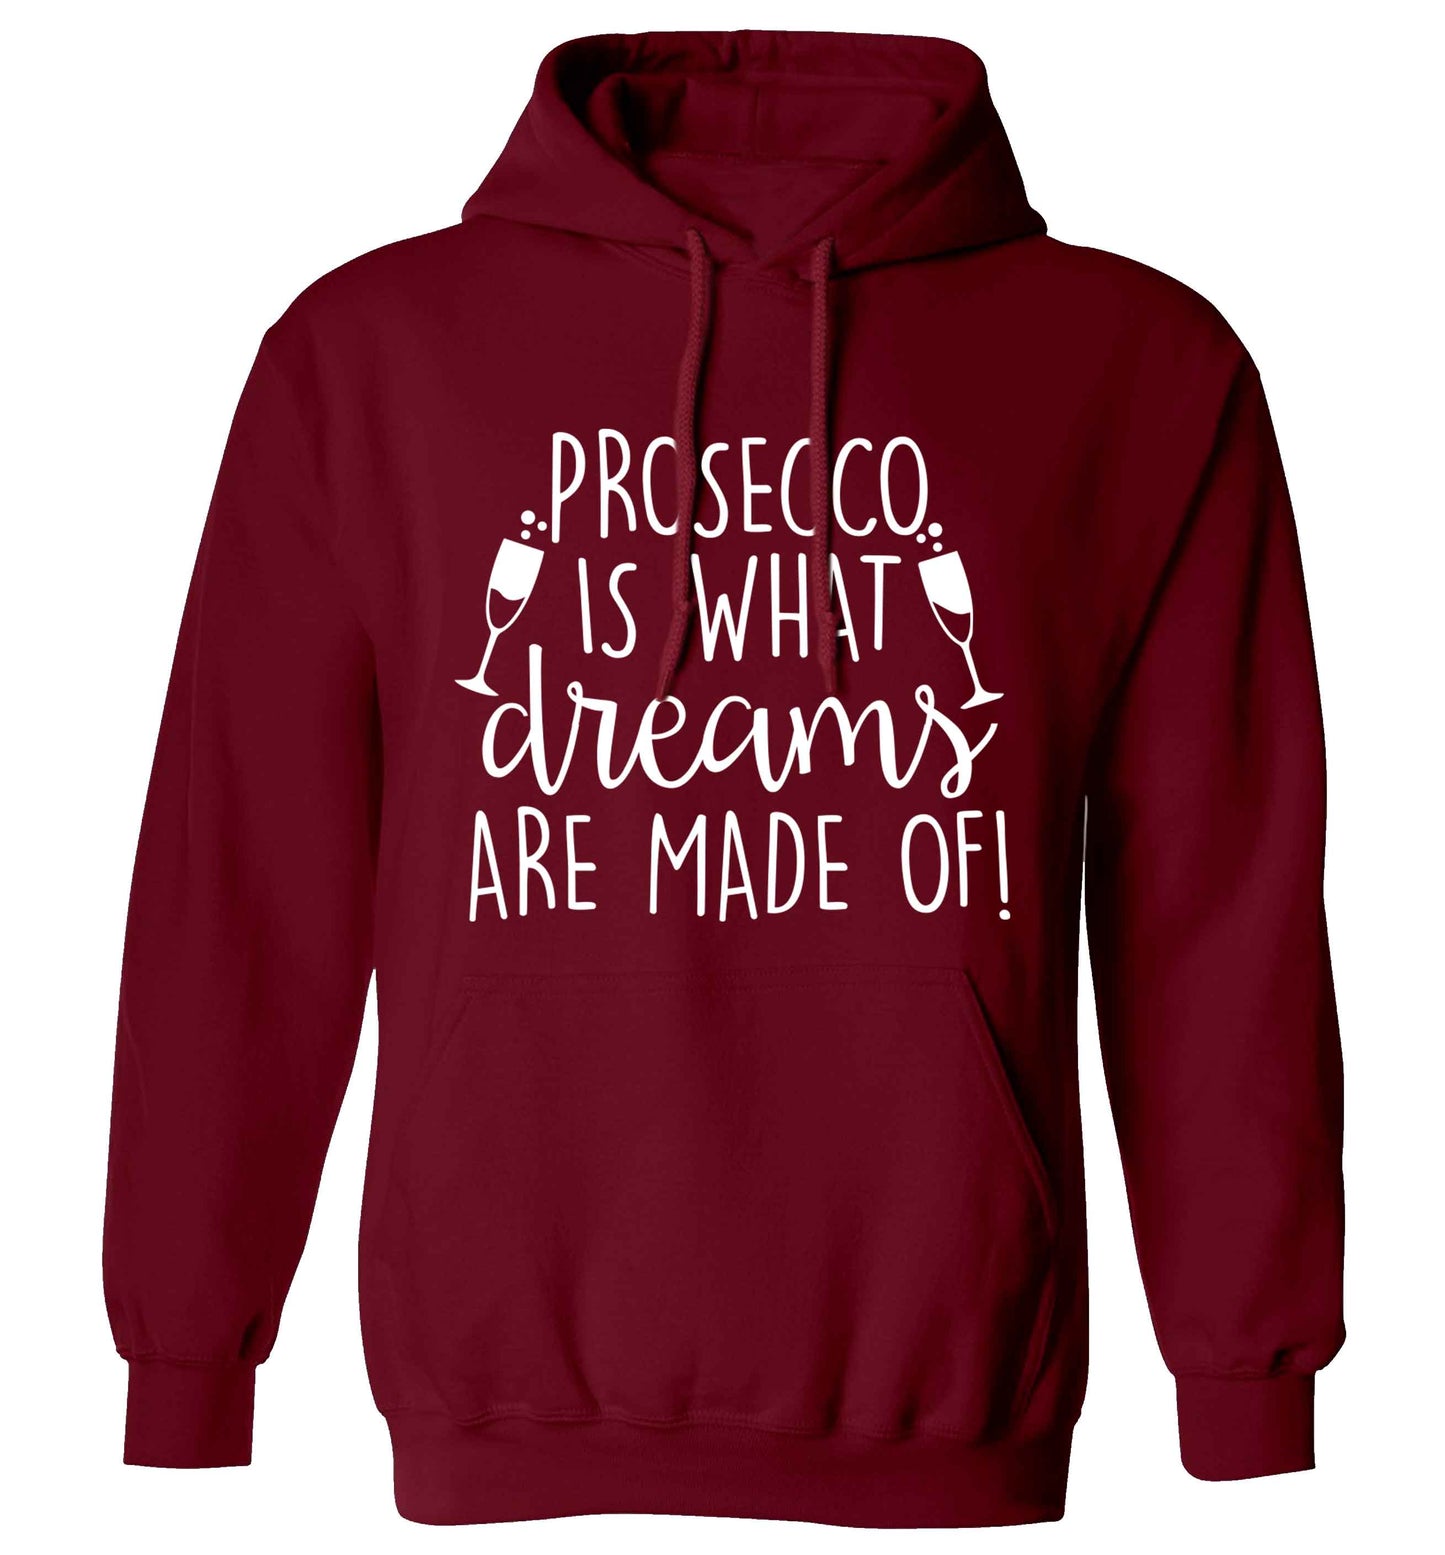 Prosecco is what dreams are made of adults unisex maroon hoodie 2XL